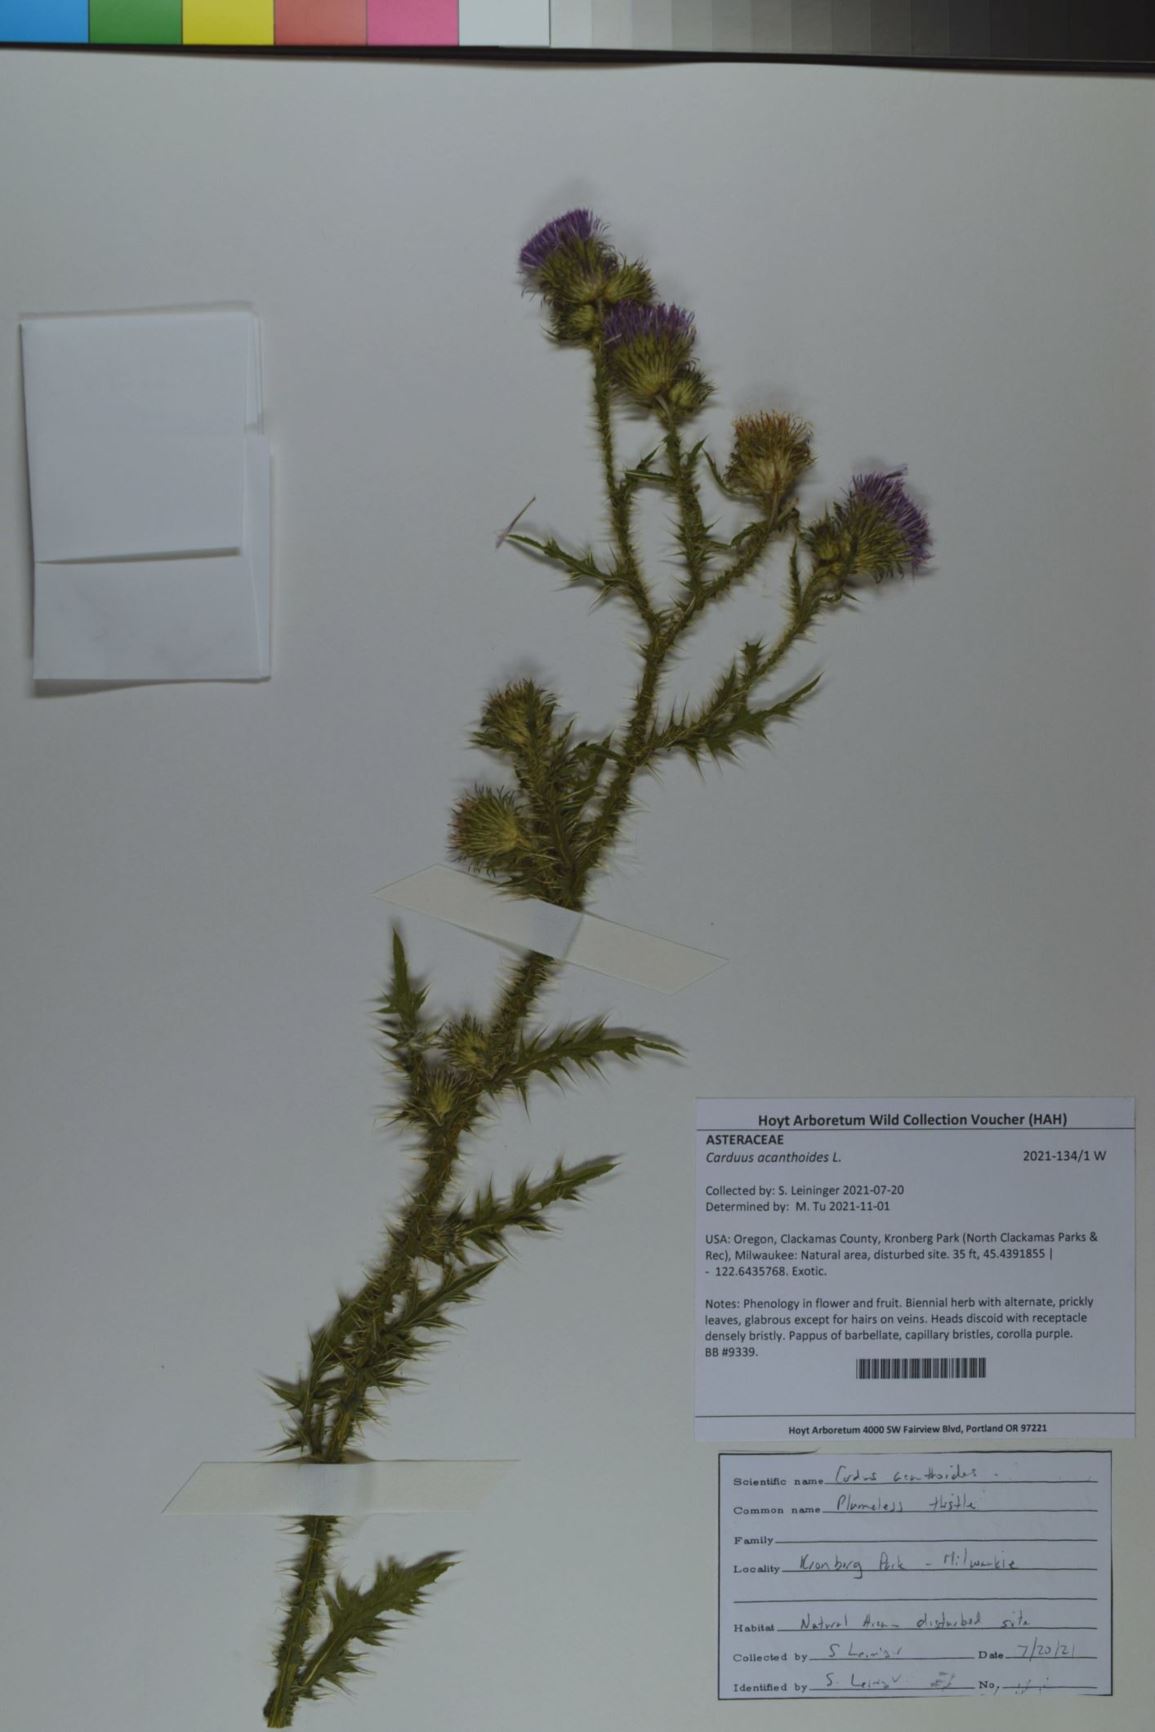 Carduus acanthoides - spiny plumeless thistle, welted thistle, plumeless thistle